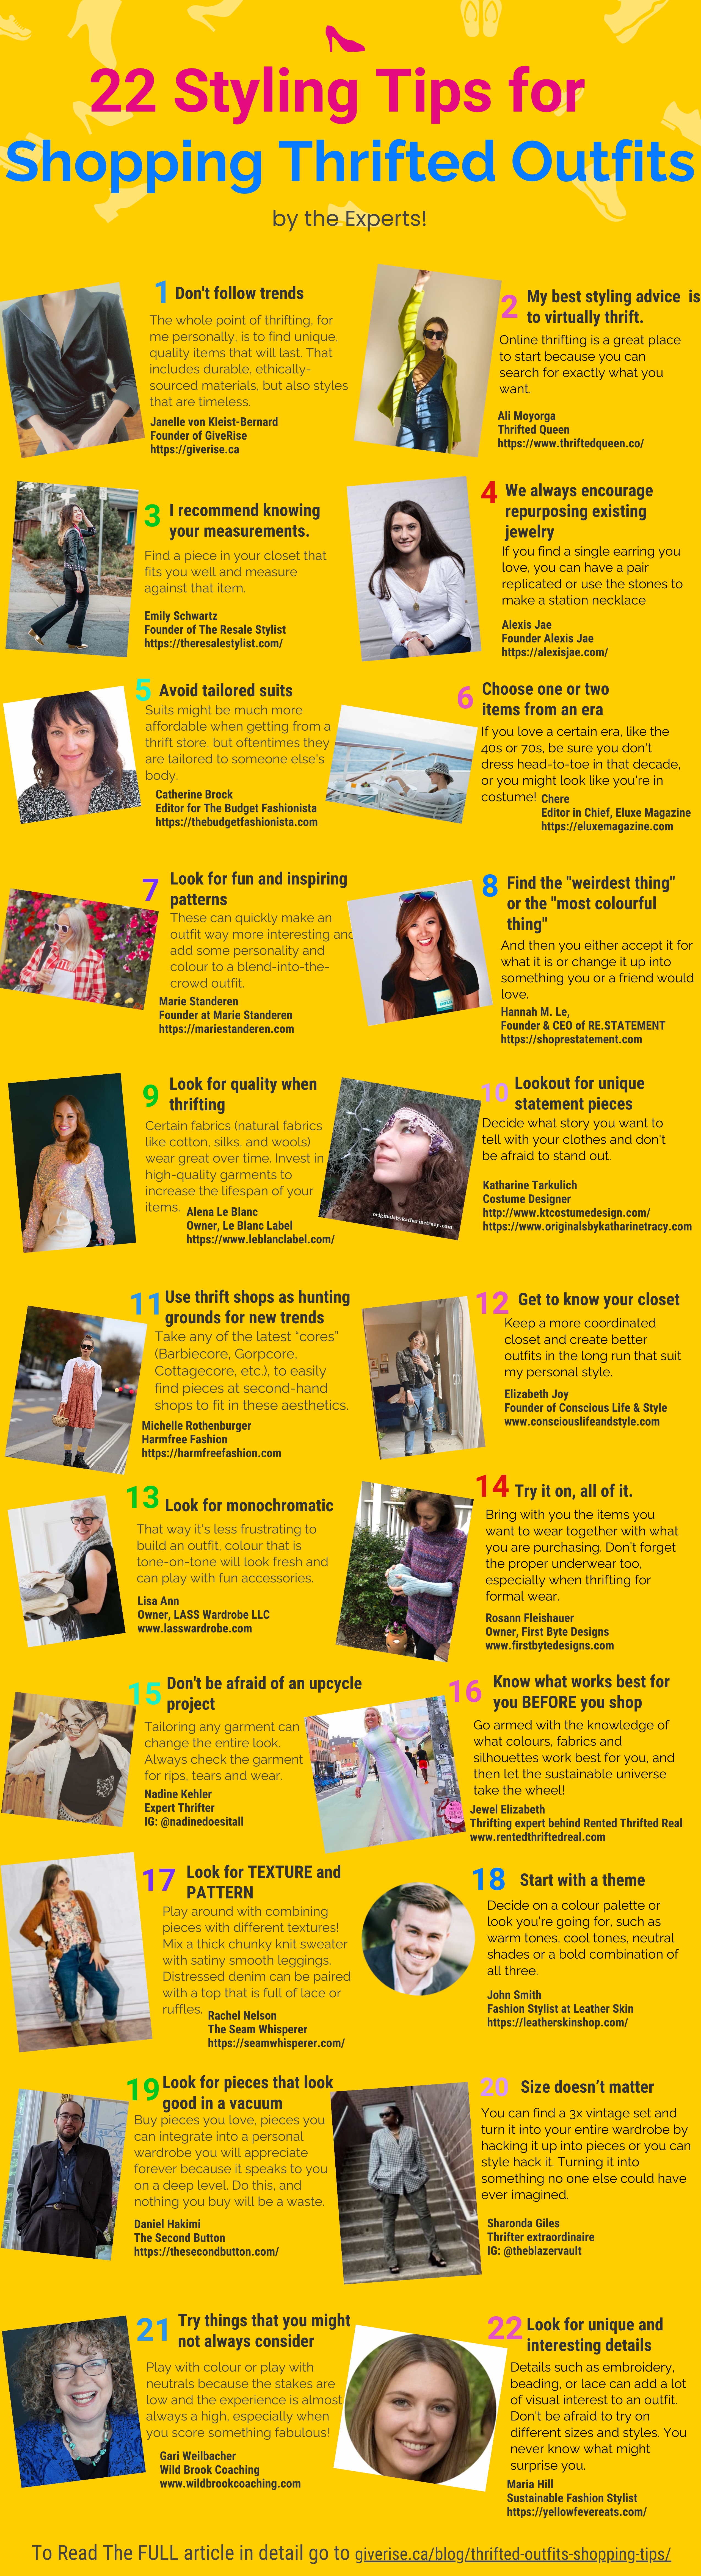 thrifting tips infographic